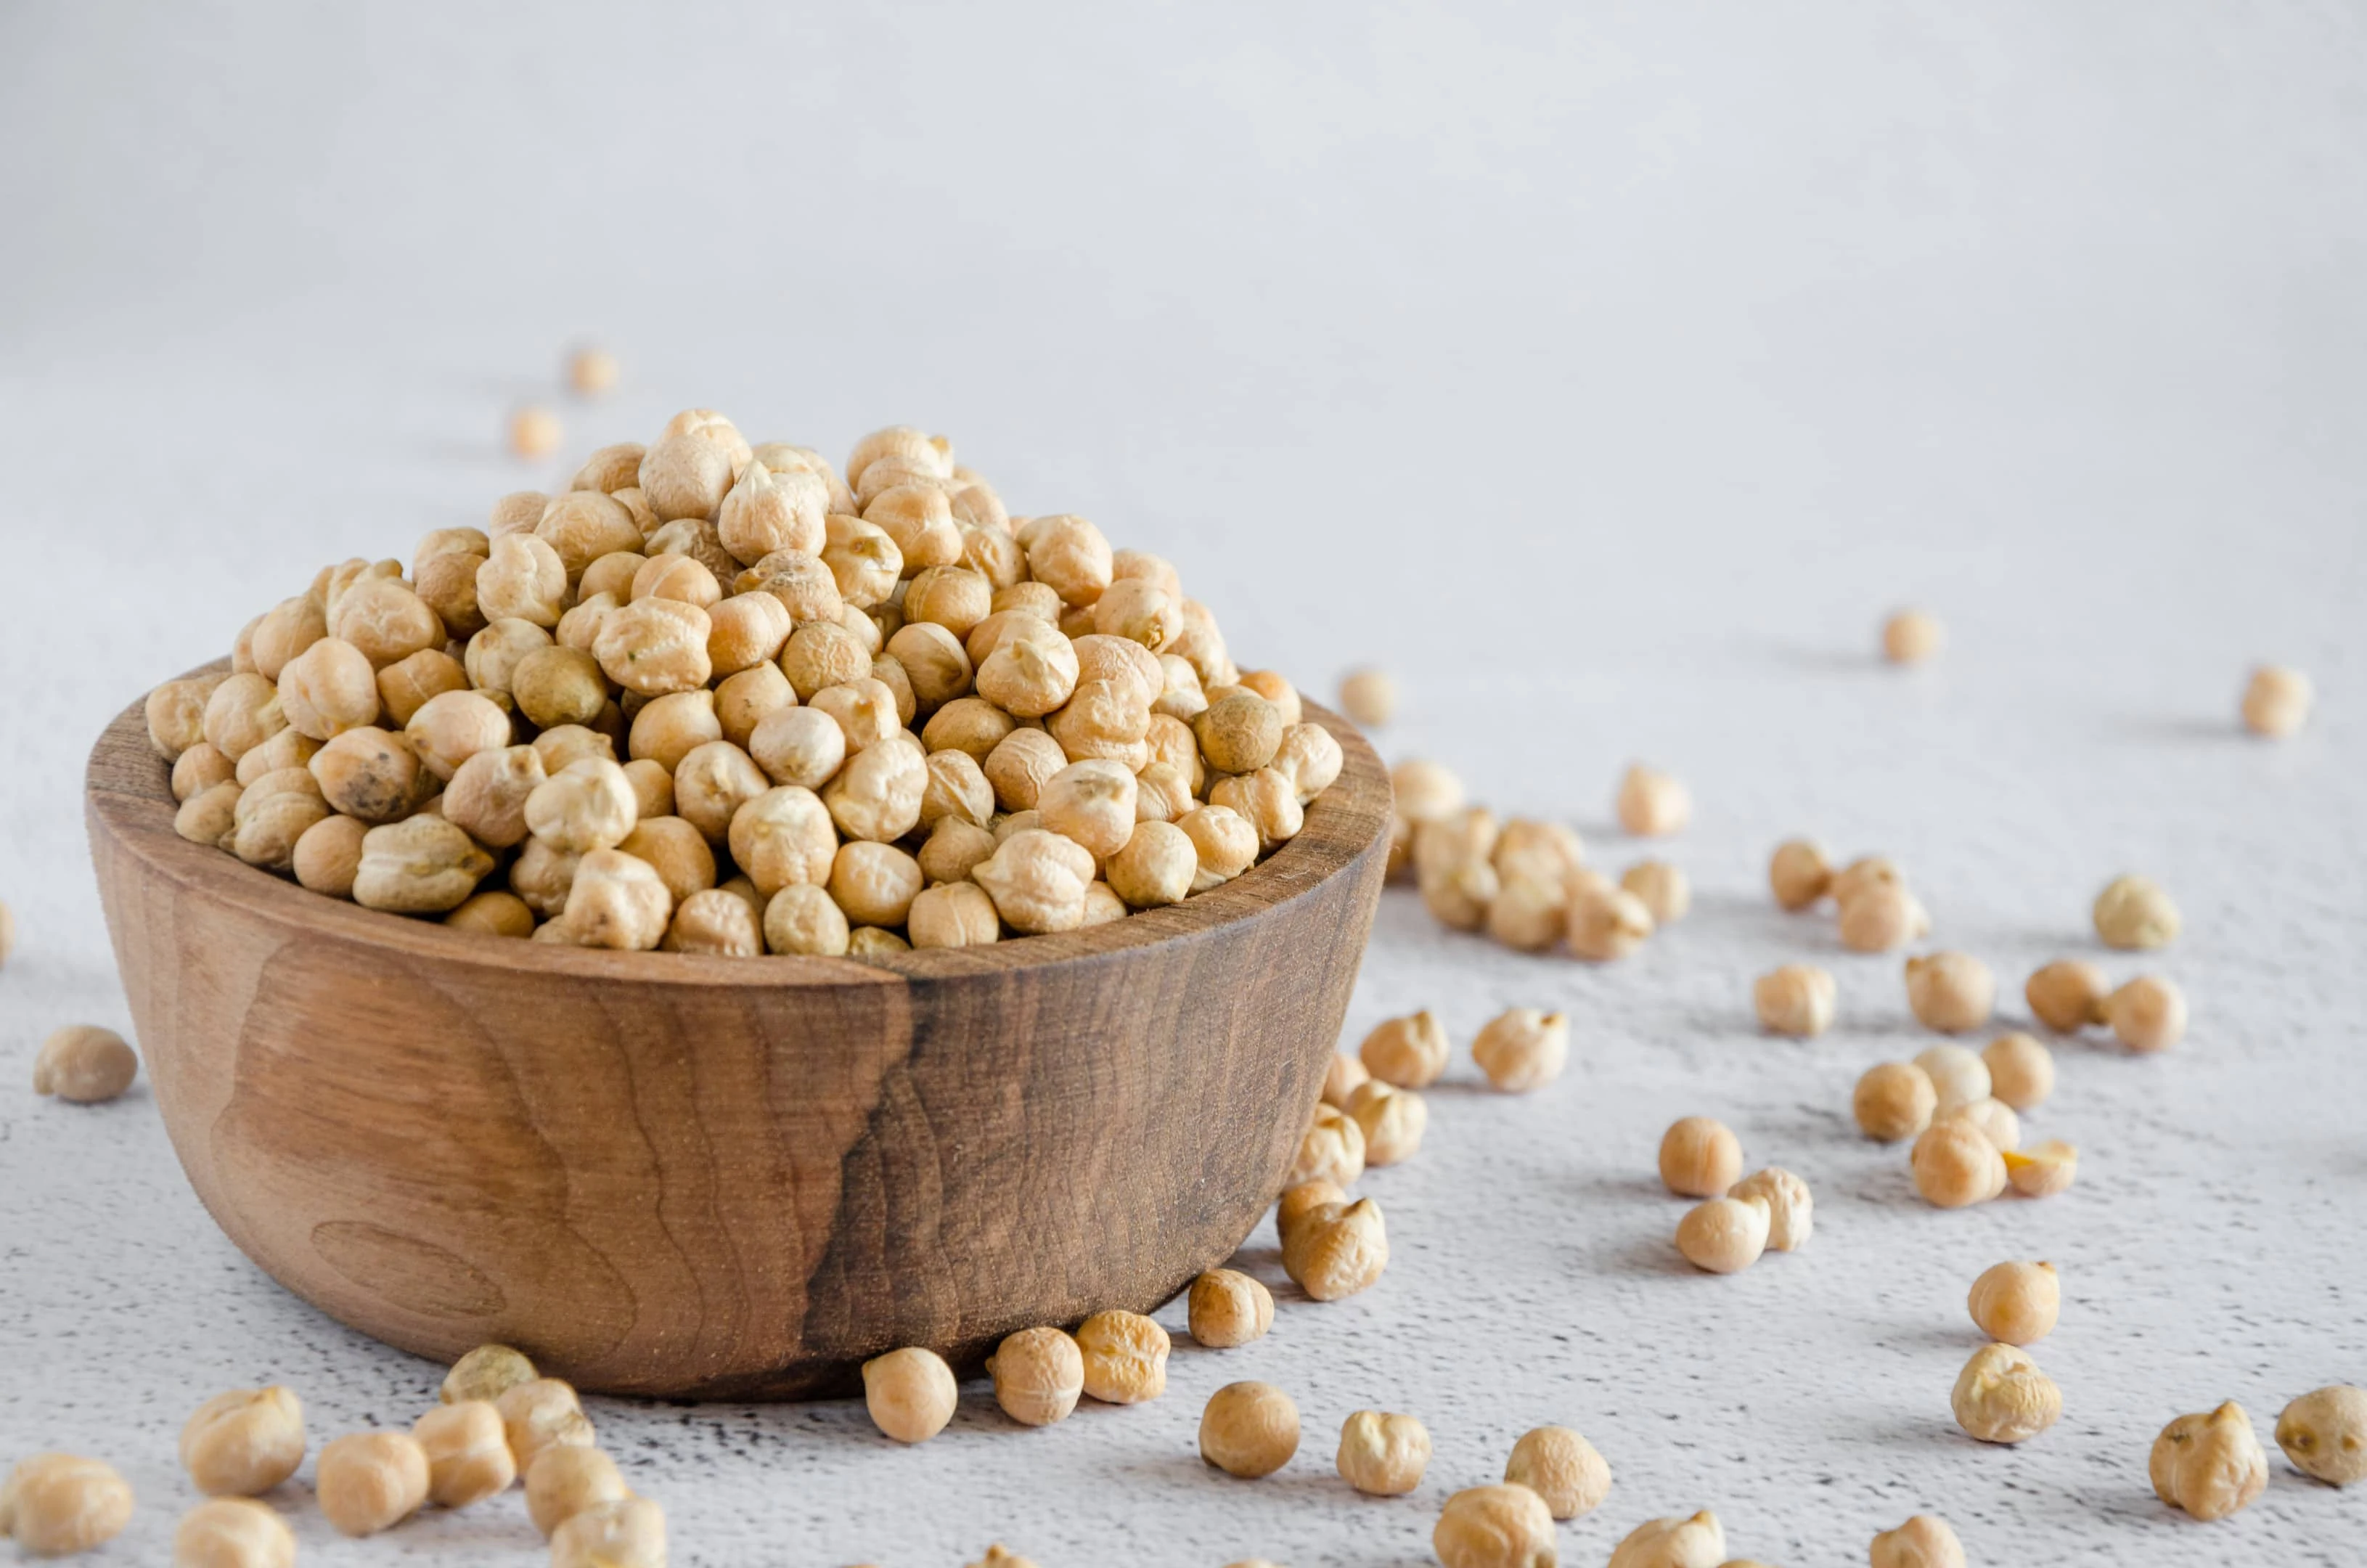 Raw chickpeas in wooden bowl on light surface